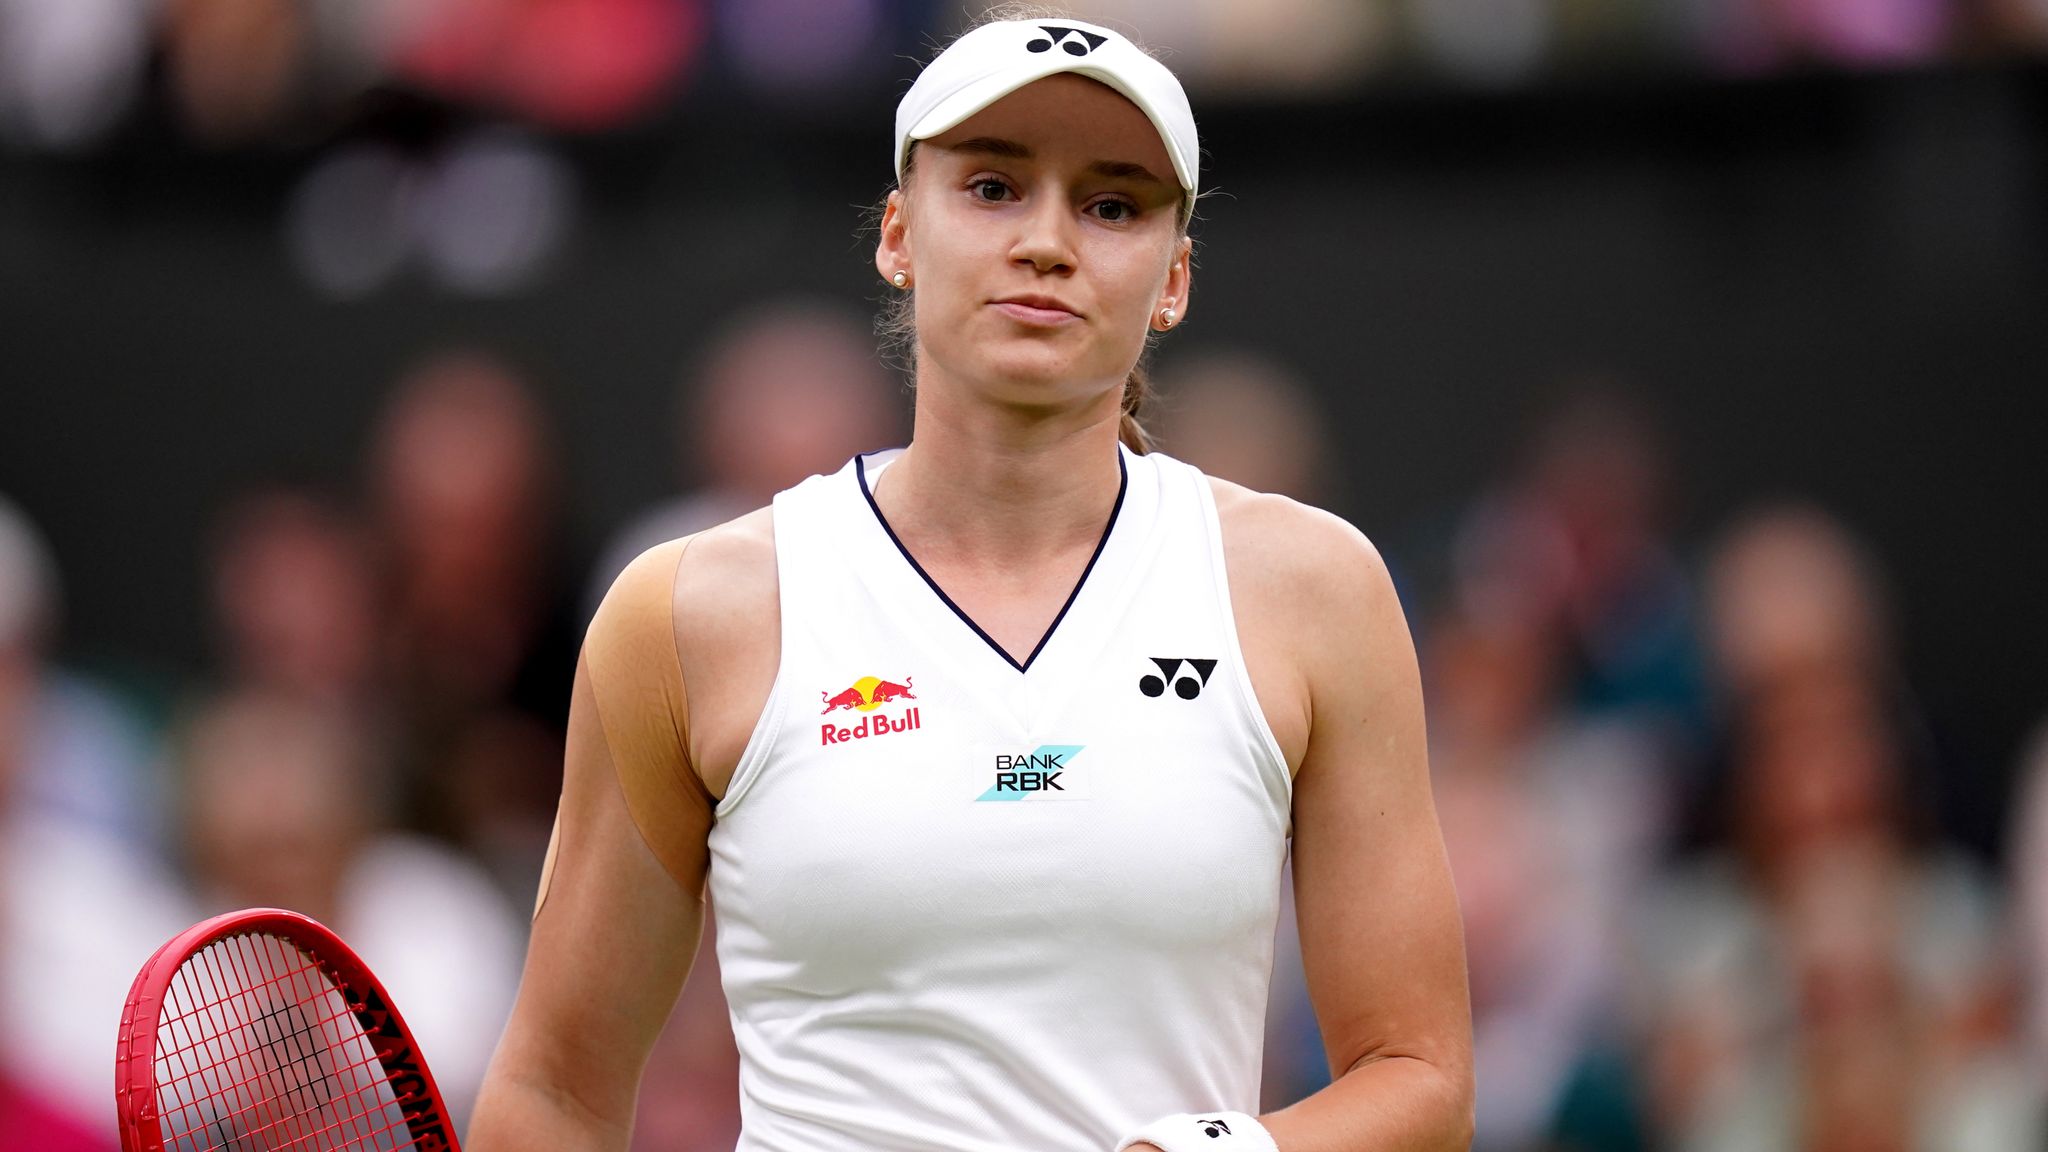 Wimbledon Elena Rybakina overcomes slow start to begin title defence with win over Shelby Rogers Tennis News Sky Sports